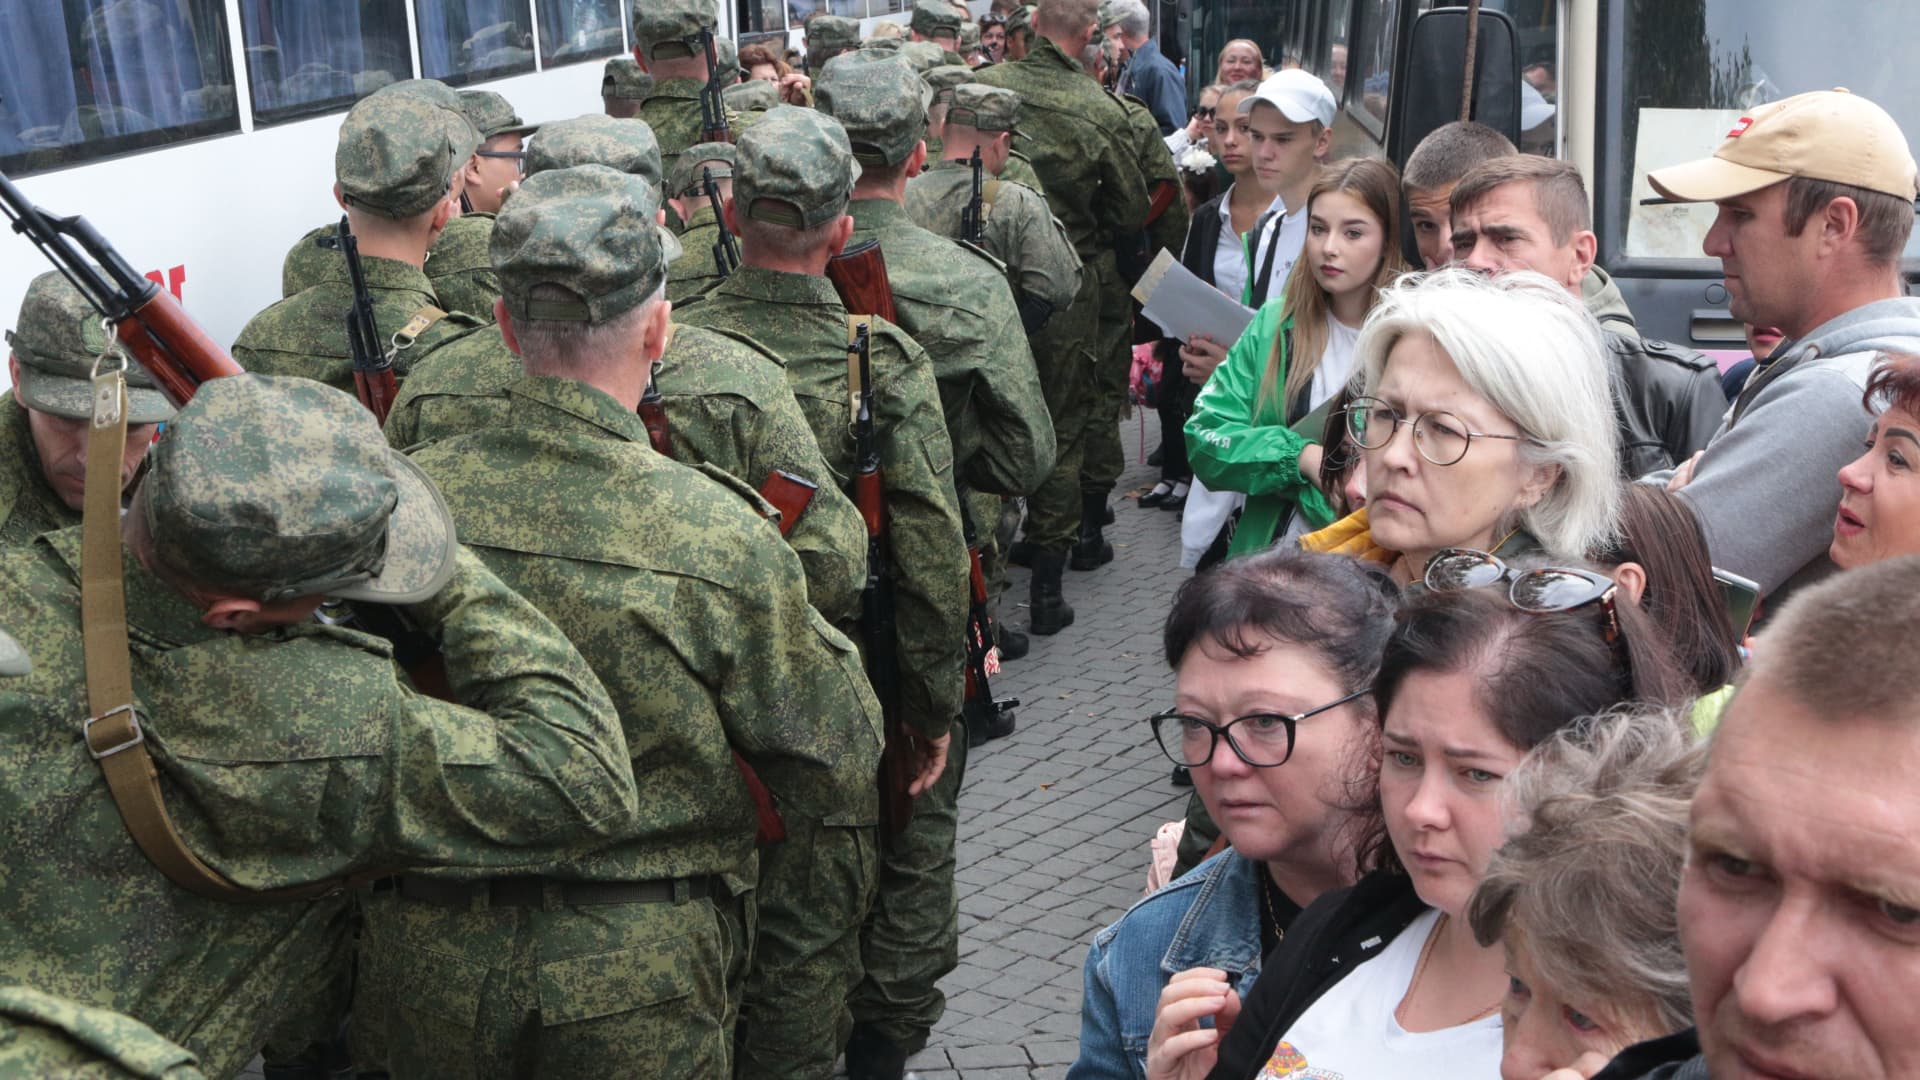 Reservists drafted during the partial mobilisation attend a departure ceremony in Sevastopol, Crimea, on September 27, 2022. -